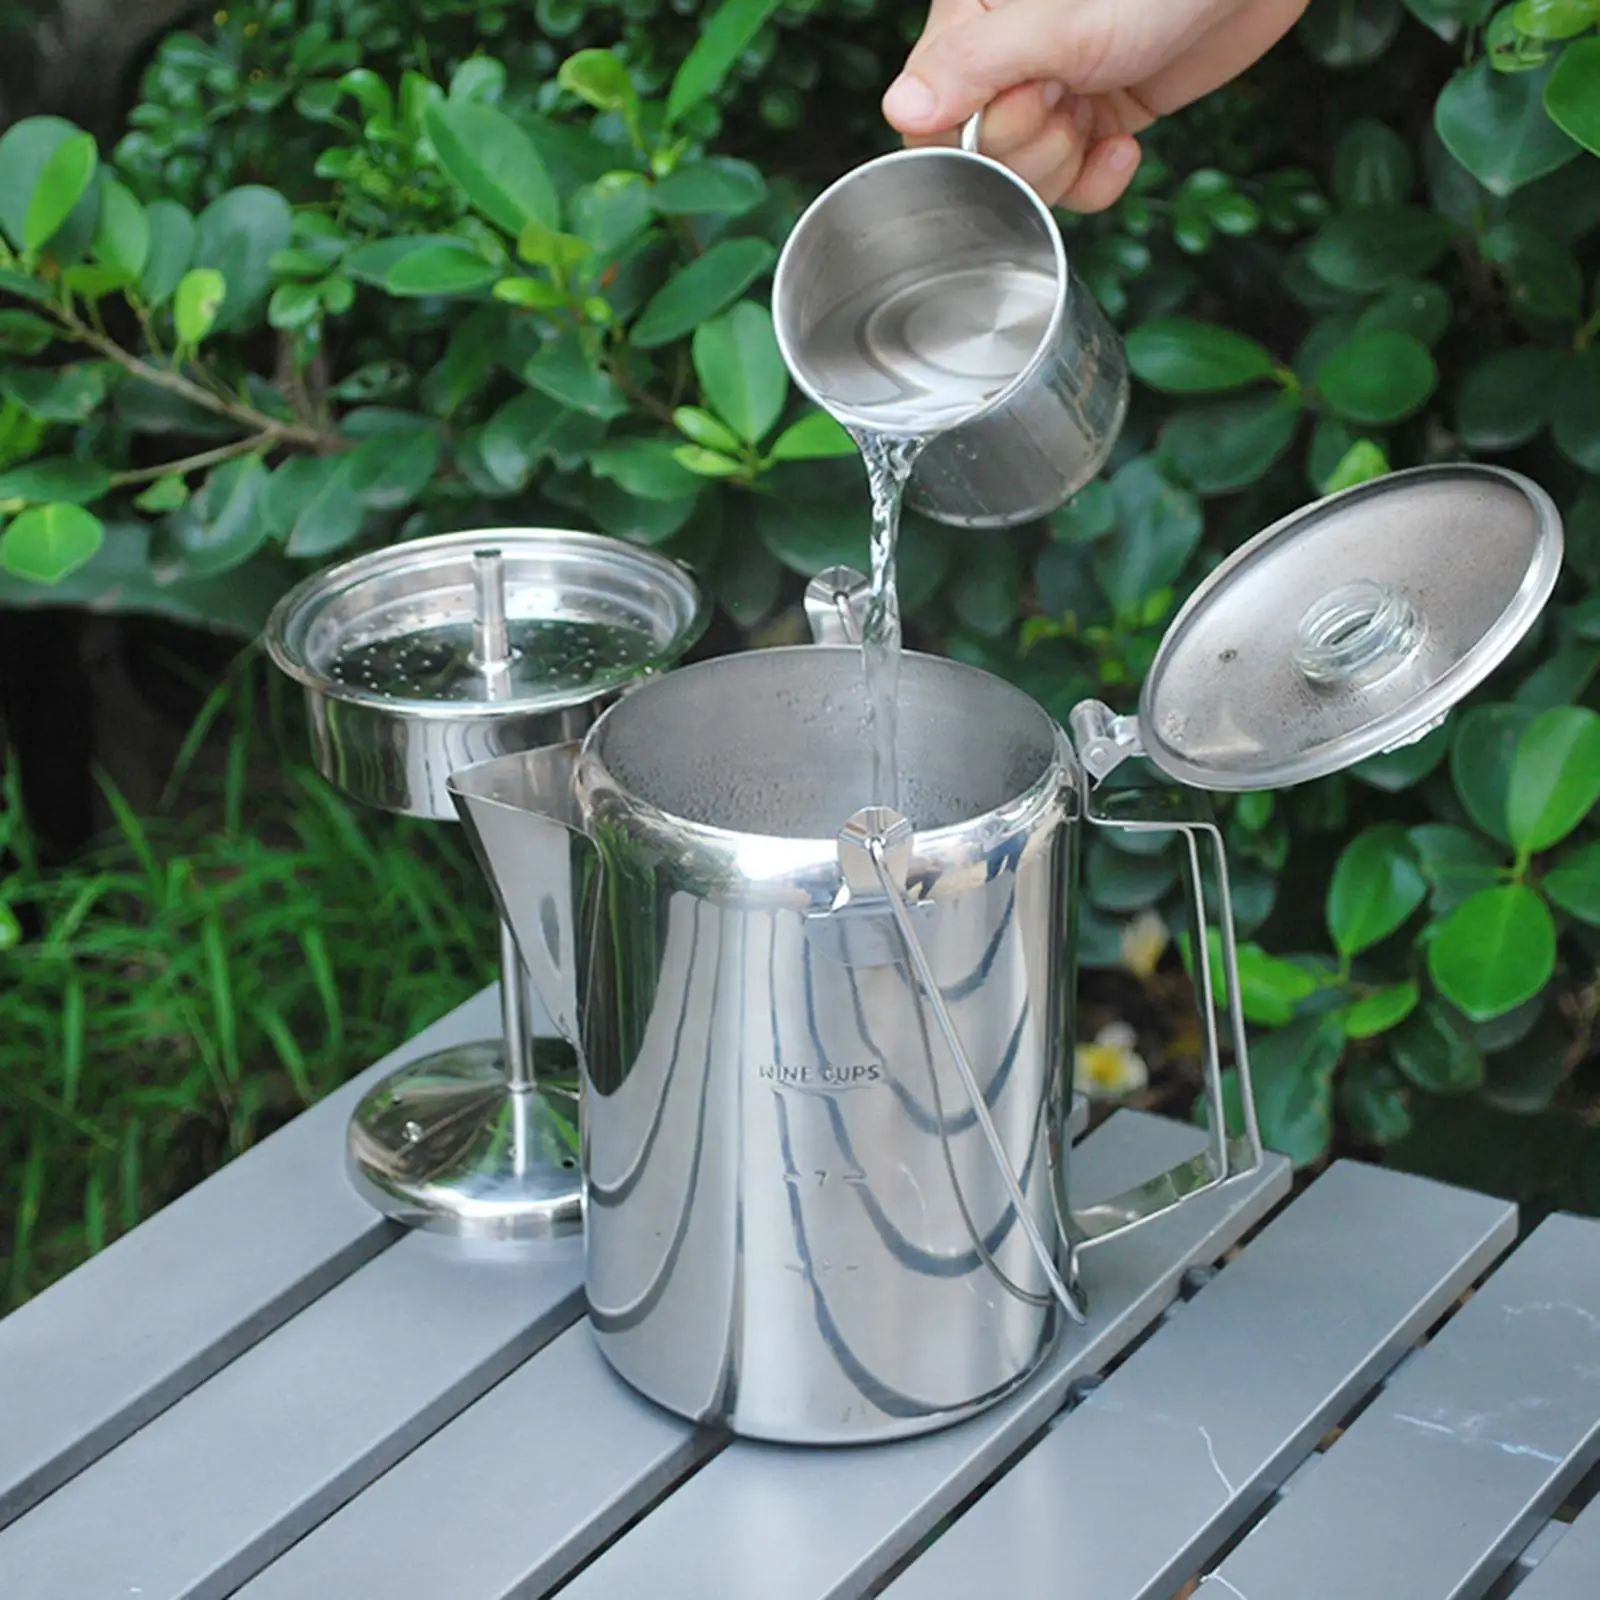 https://ae01.alicdn.com/kf/Sec6b57a674c140039966fd54d74a4d684/Stainless-Steel-9-Cups-Percolator-Coffee-Maker-for-Outdoor-Camping.jpg